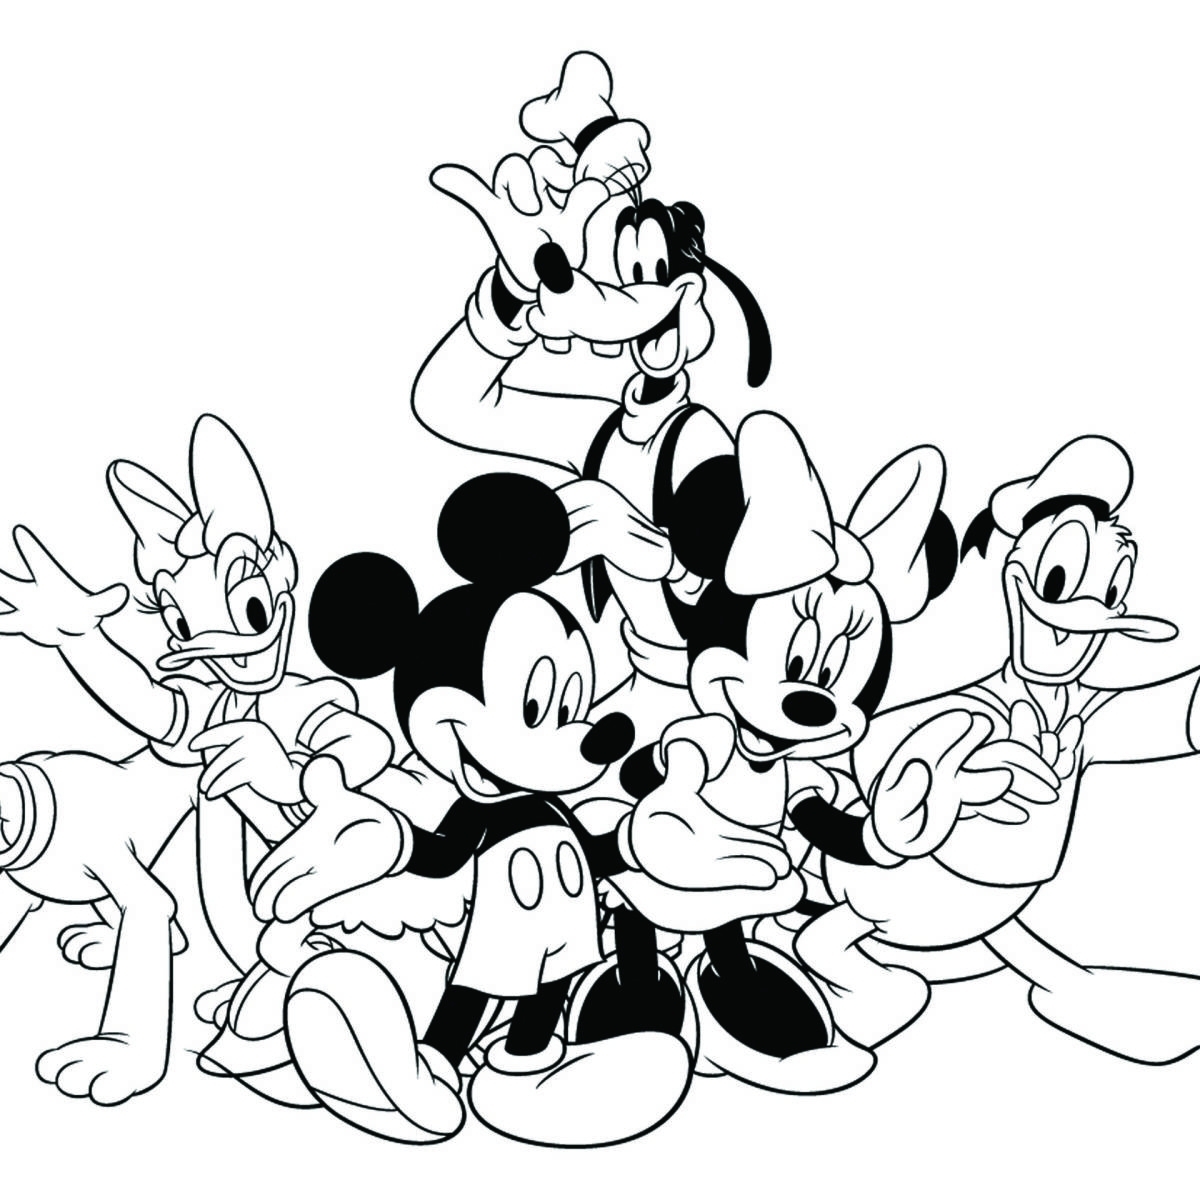 Walt Disney World Coloring Pages at GetColorings.com | Free printable